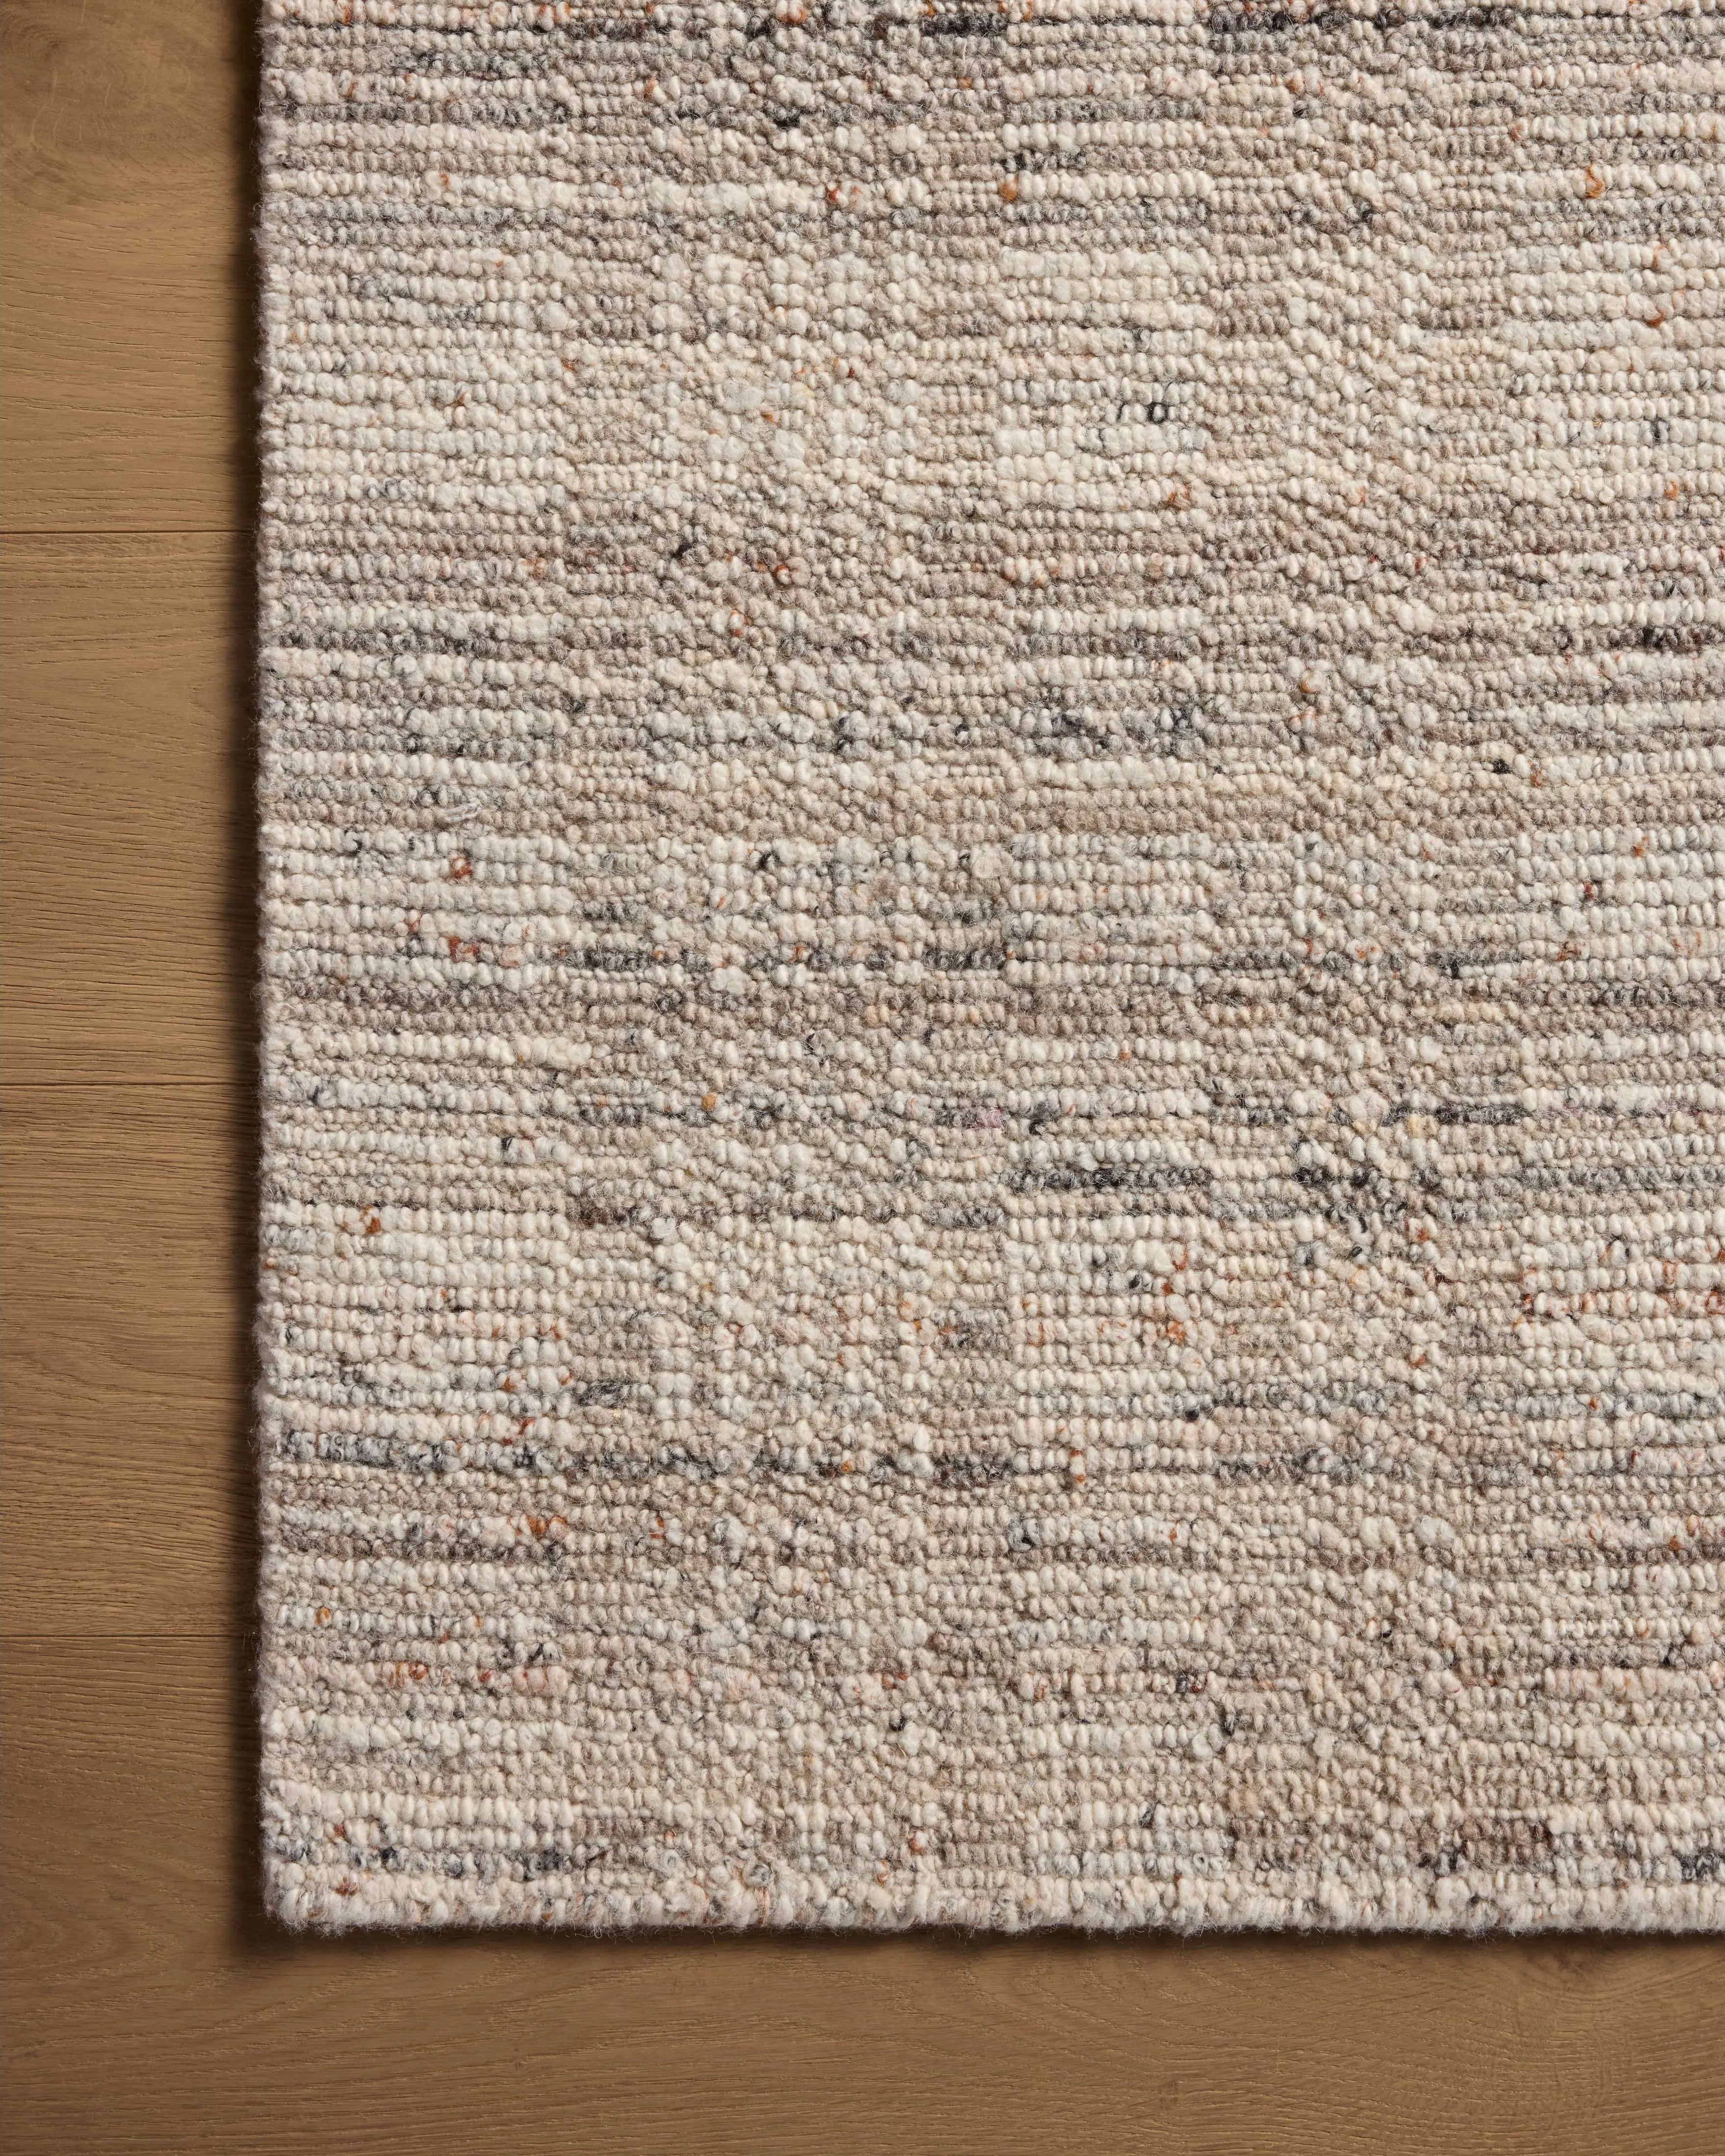 The Sonya Pebble / Fog Rug is a hand-loomed area rug with a light, airy palette and understated graphic design. The rug’s textural pile is a soft blend of wool and nylon that creates dimension in living rooms, bedrooms, and more. Amethyst Home provides interior design, new home construction design consulting, vintage area rugs, and lighting in the Newport Beach metro area.